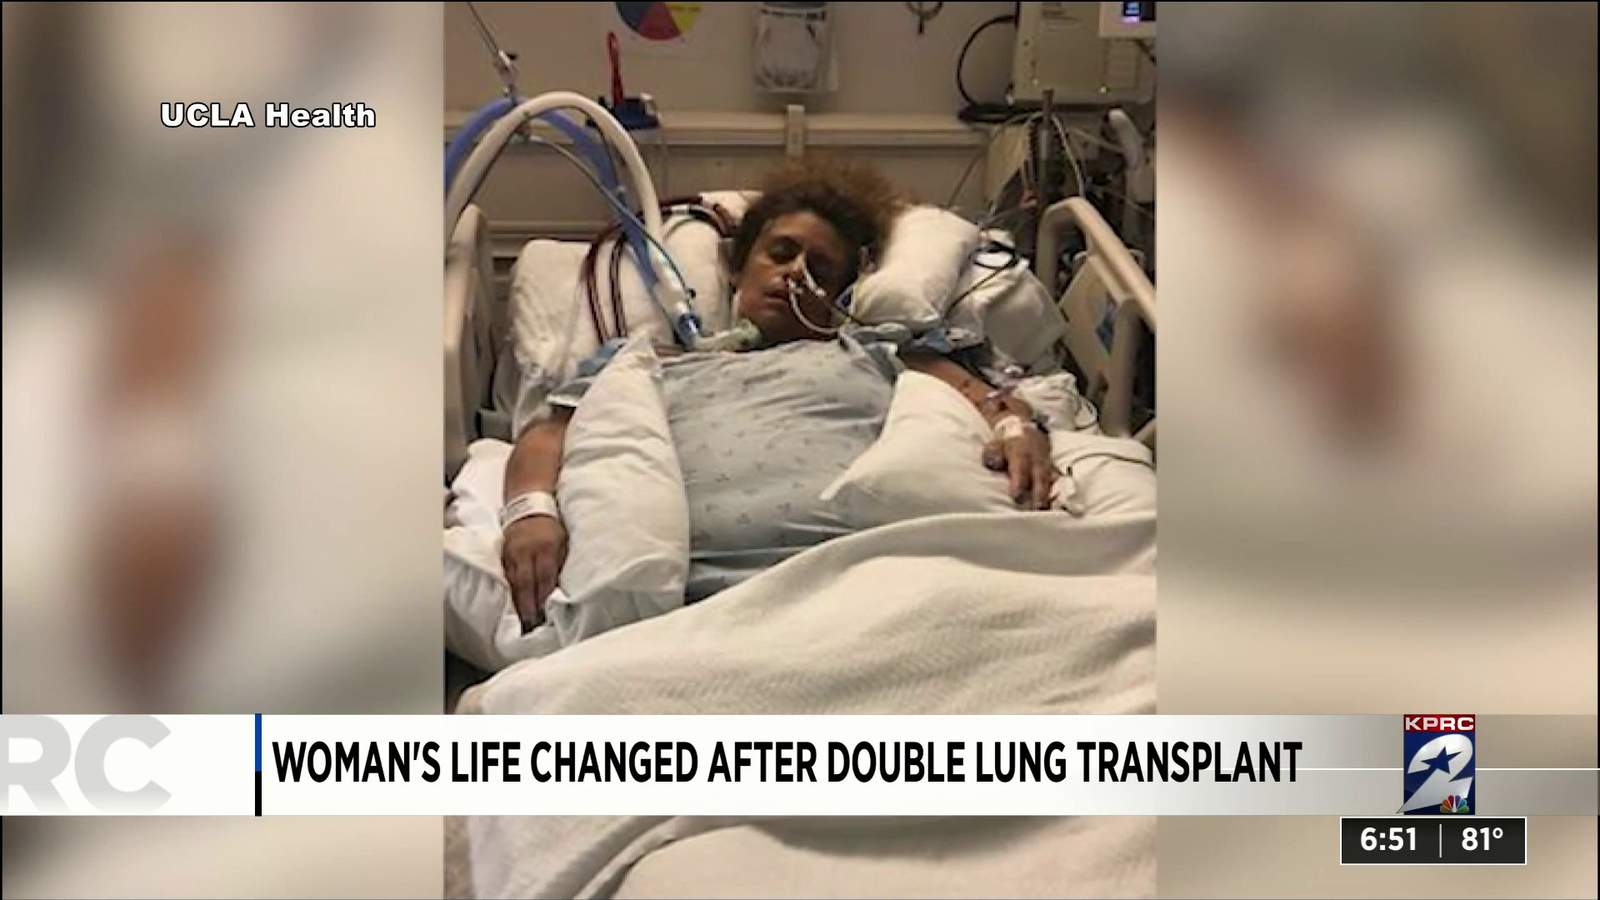 One Good Thing: Womans life changes after double lung transplant